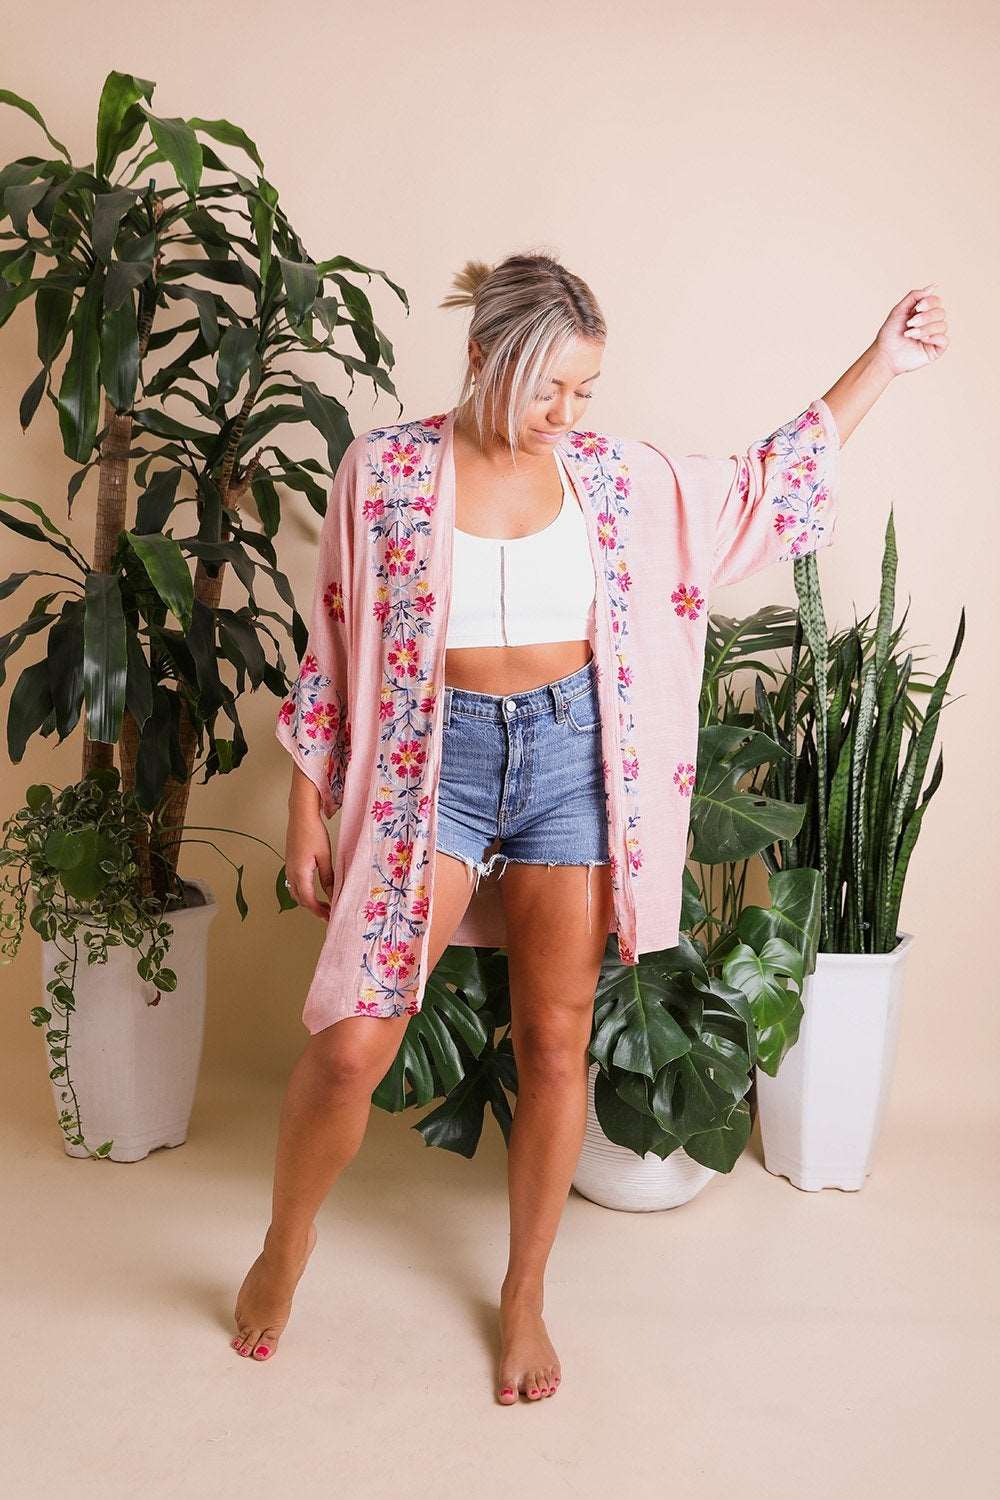 Nfin8 Tranquil Bloom Anemone Embroidered Kimono